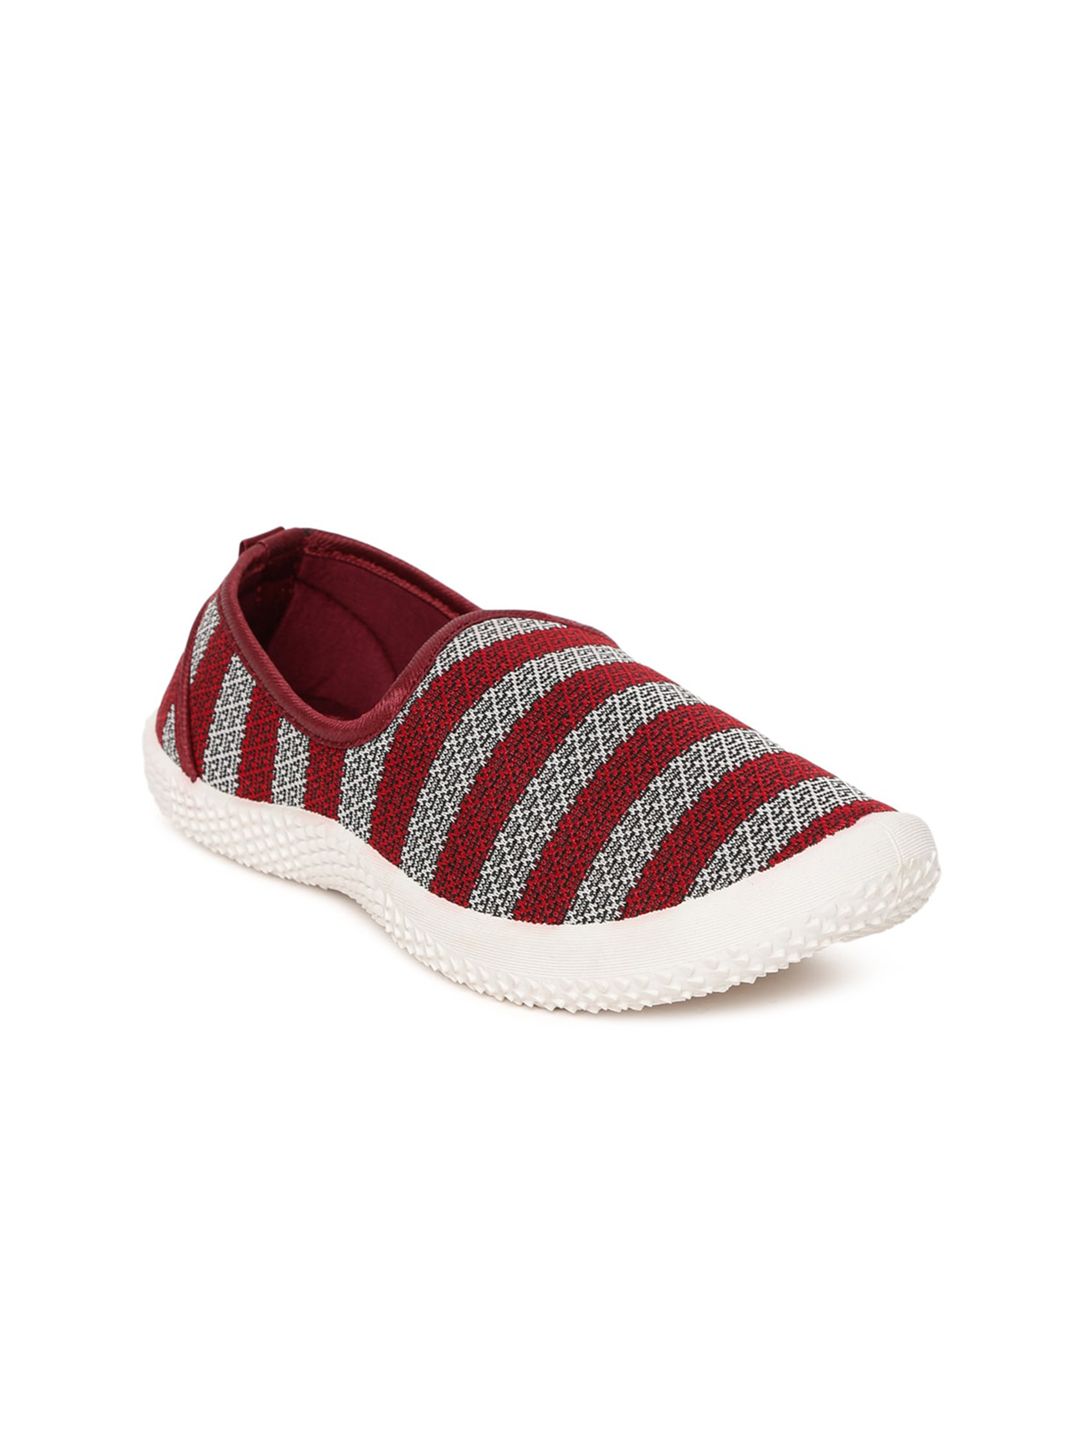 Paragon Women Red Woven Design Slip-On Sneakers Price in India